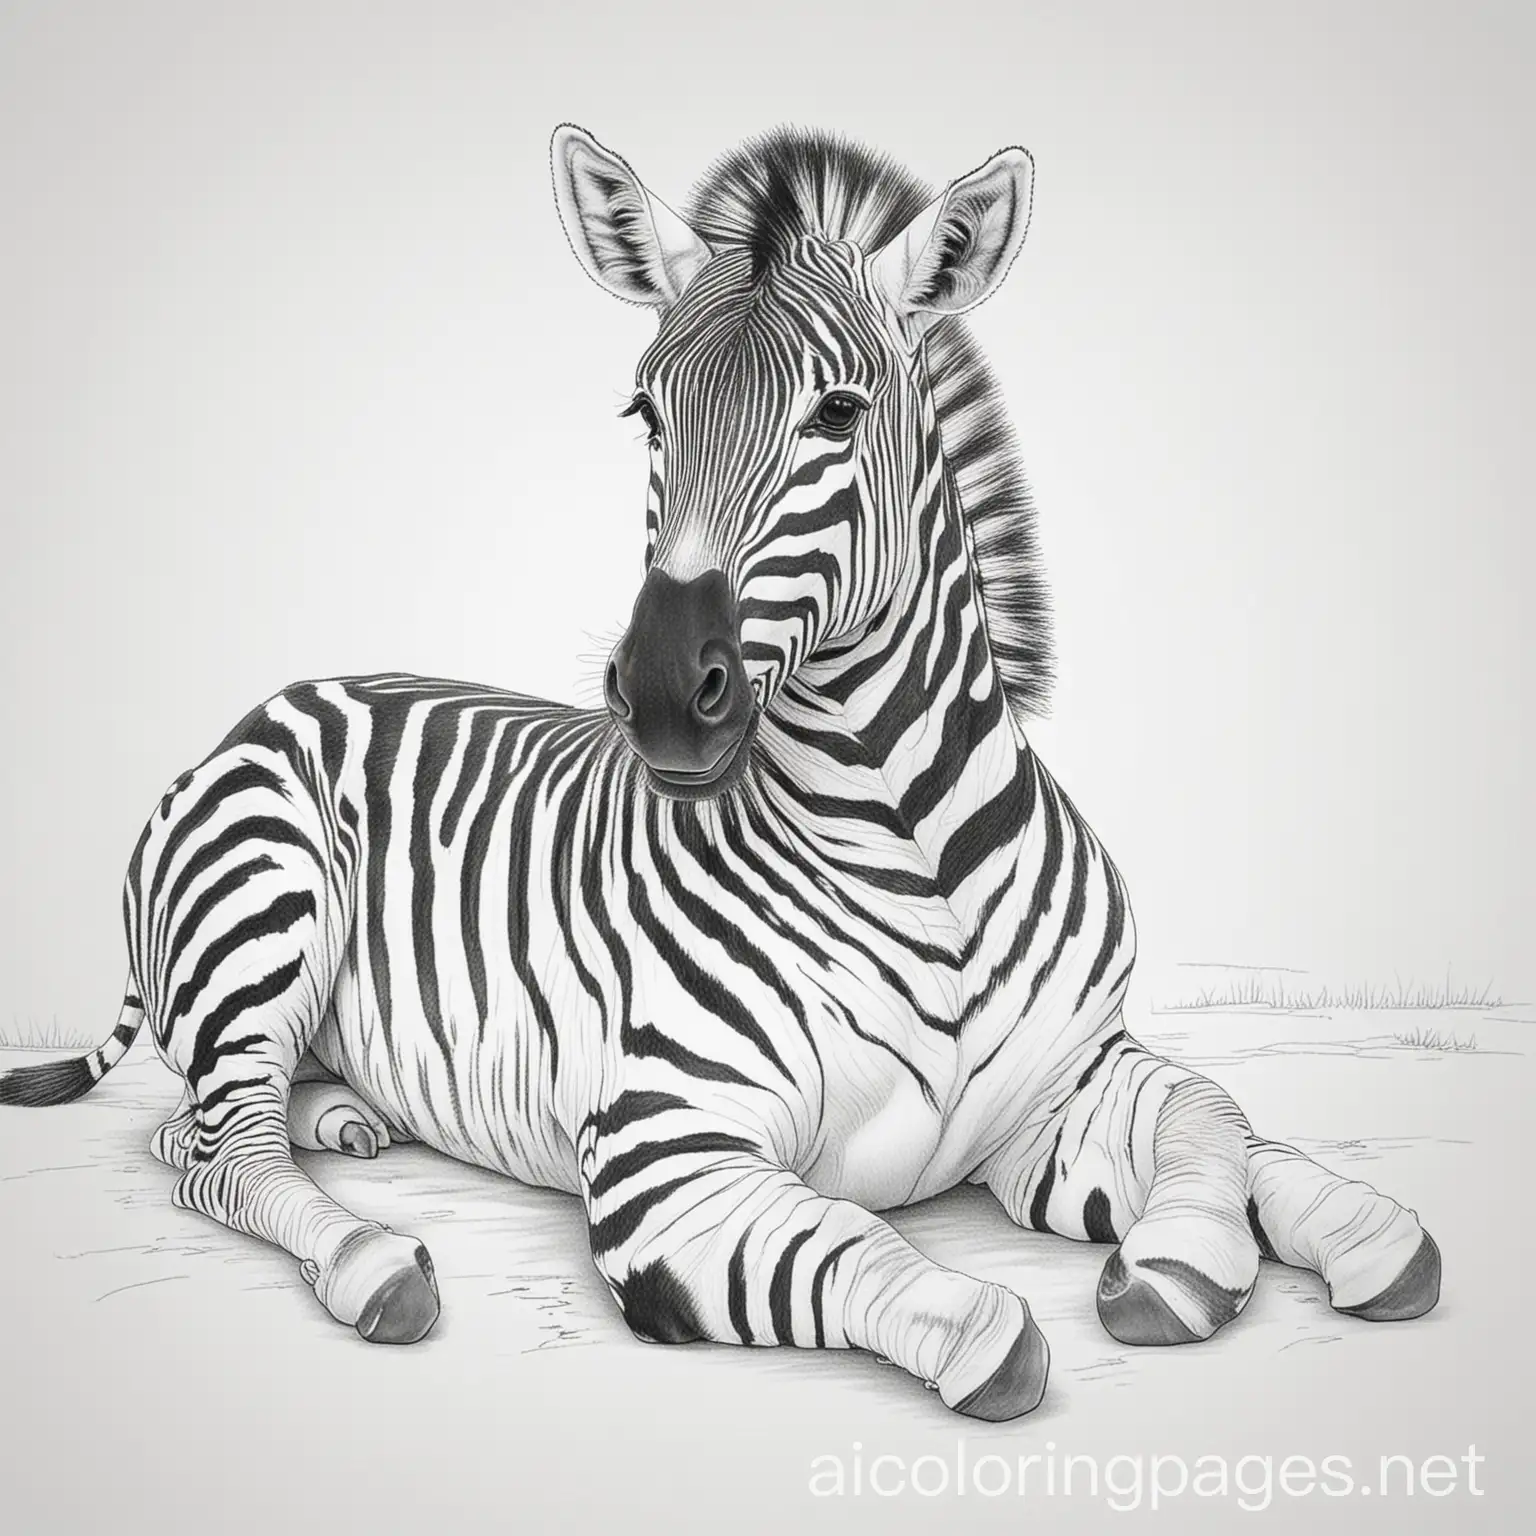 zebra laying down, front view, laying down facing front, Coloring Page, black and white, line art, white background, Simplicity, Ample White Space. The background of the coloring page is plain white to make it easy for young children to color within the lines. The outlines of all the subjects are easy to distinguish, making it simple for kids to color without too much difficulty